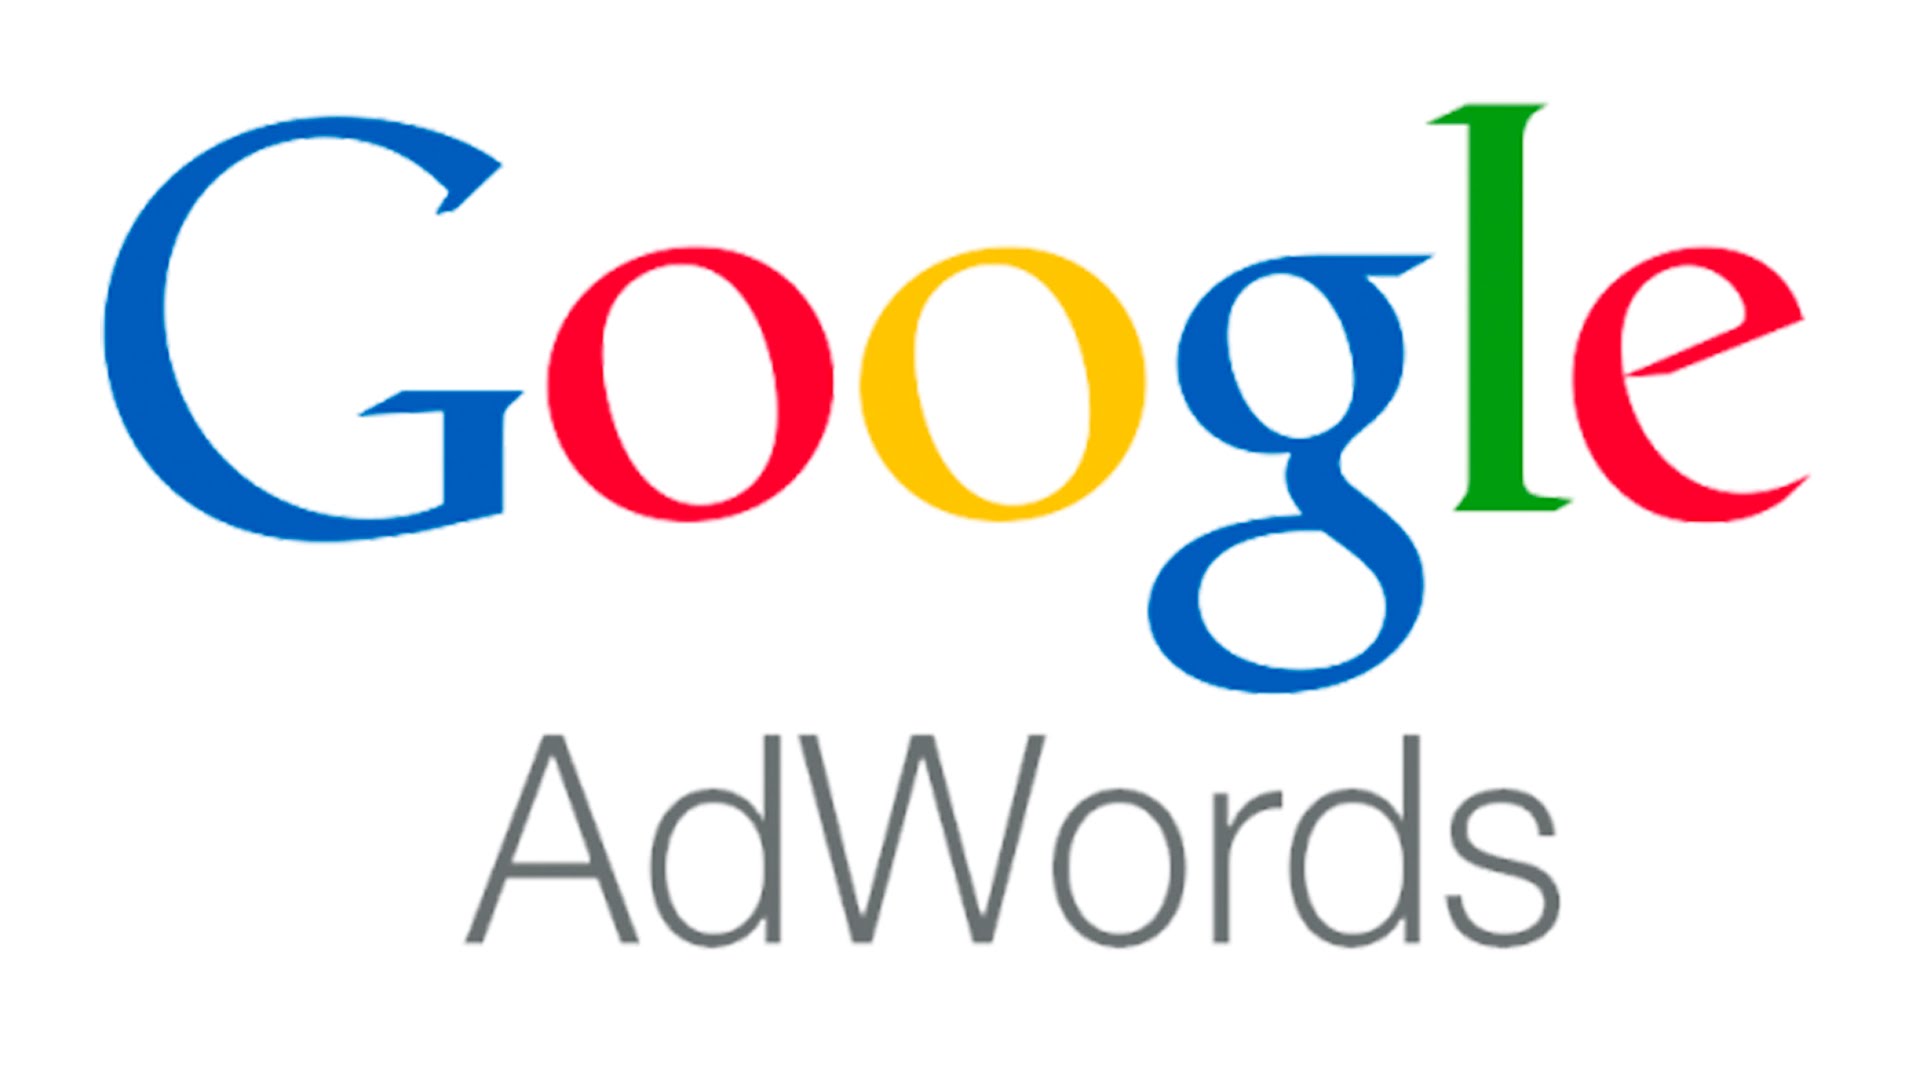 Google Adwords Introduces New 'Customer Match' Targeting